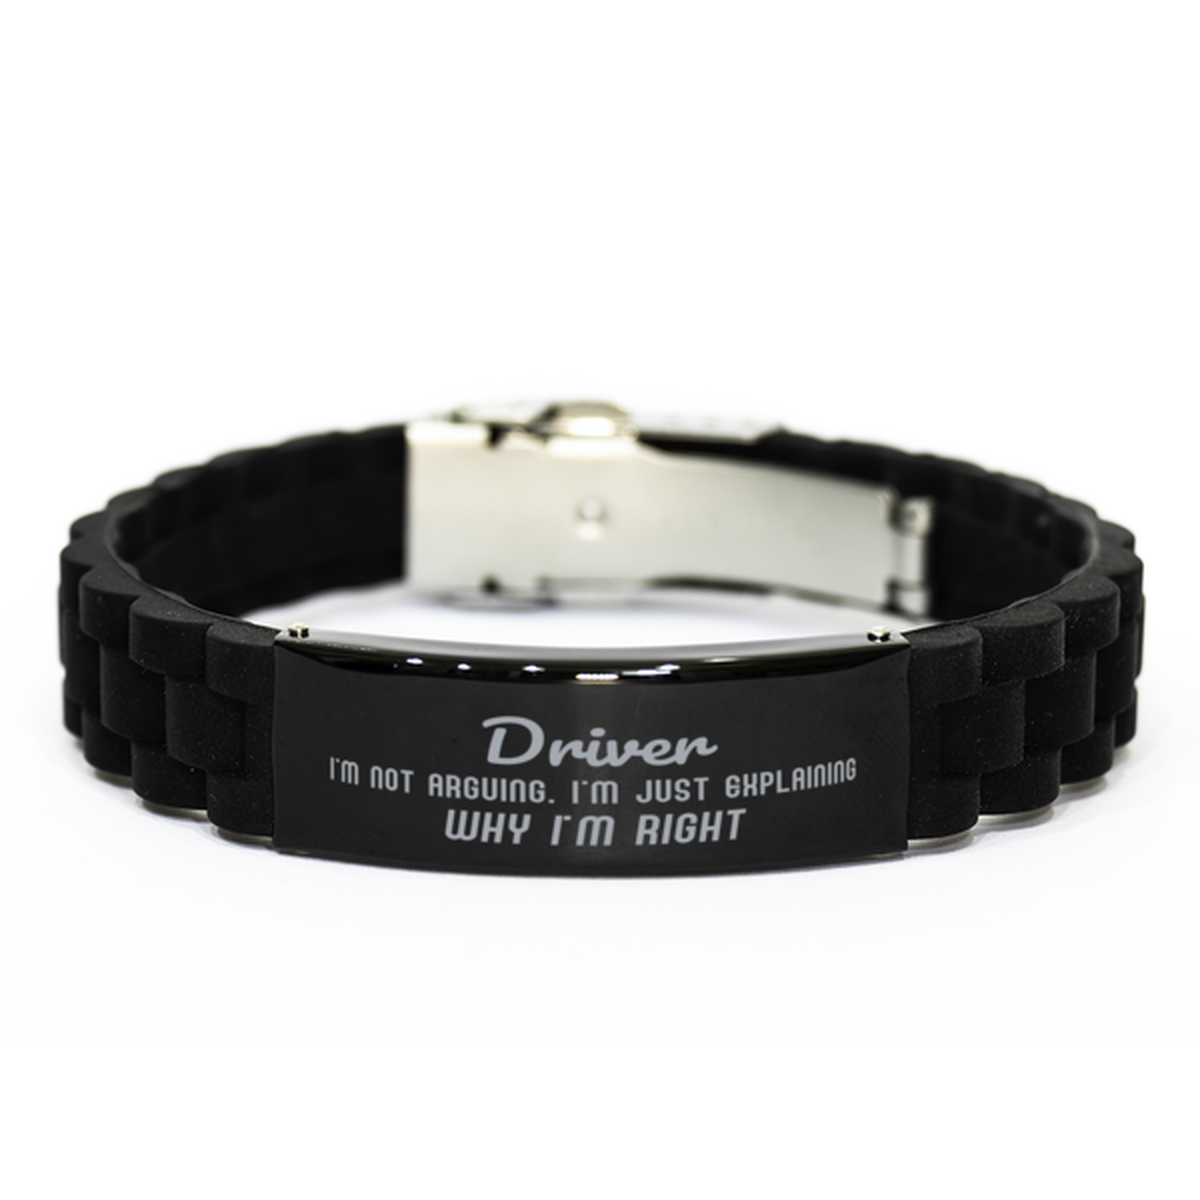 Driver I'm not Arguing. I'm Just Explaining Why I'm RIGHT Black Glidelock Clasp Bracelet, Funny Saying Quote Driver Gifts For Driver Graduation Birthday Christmas Gifts for Men Women Coworker